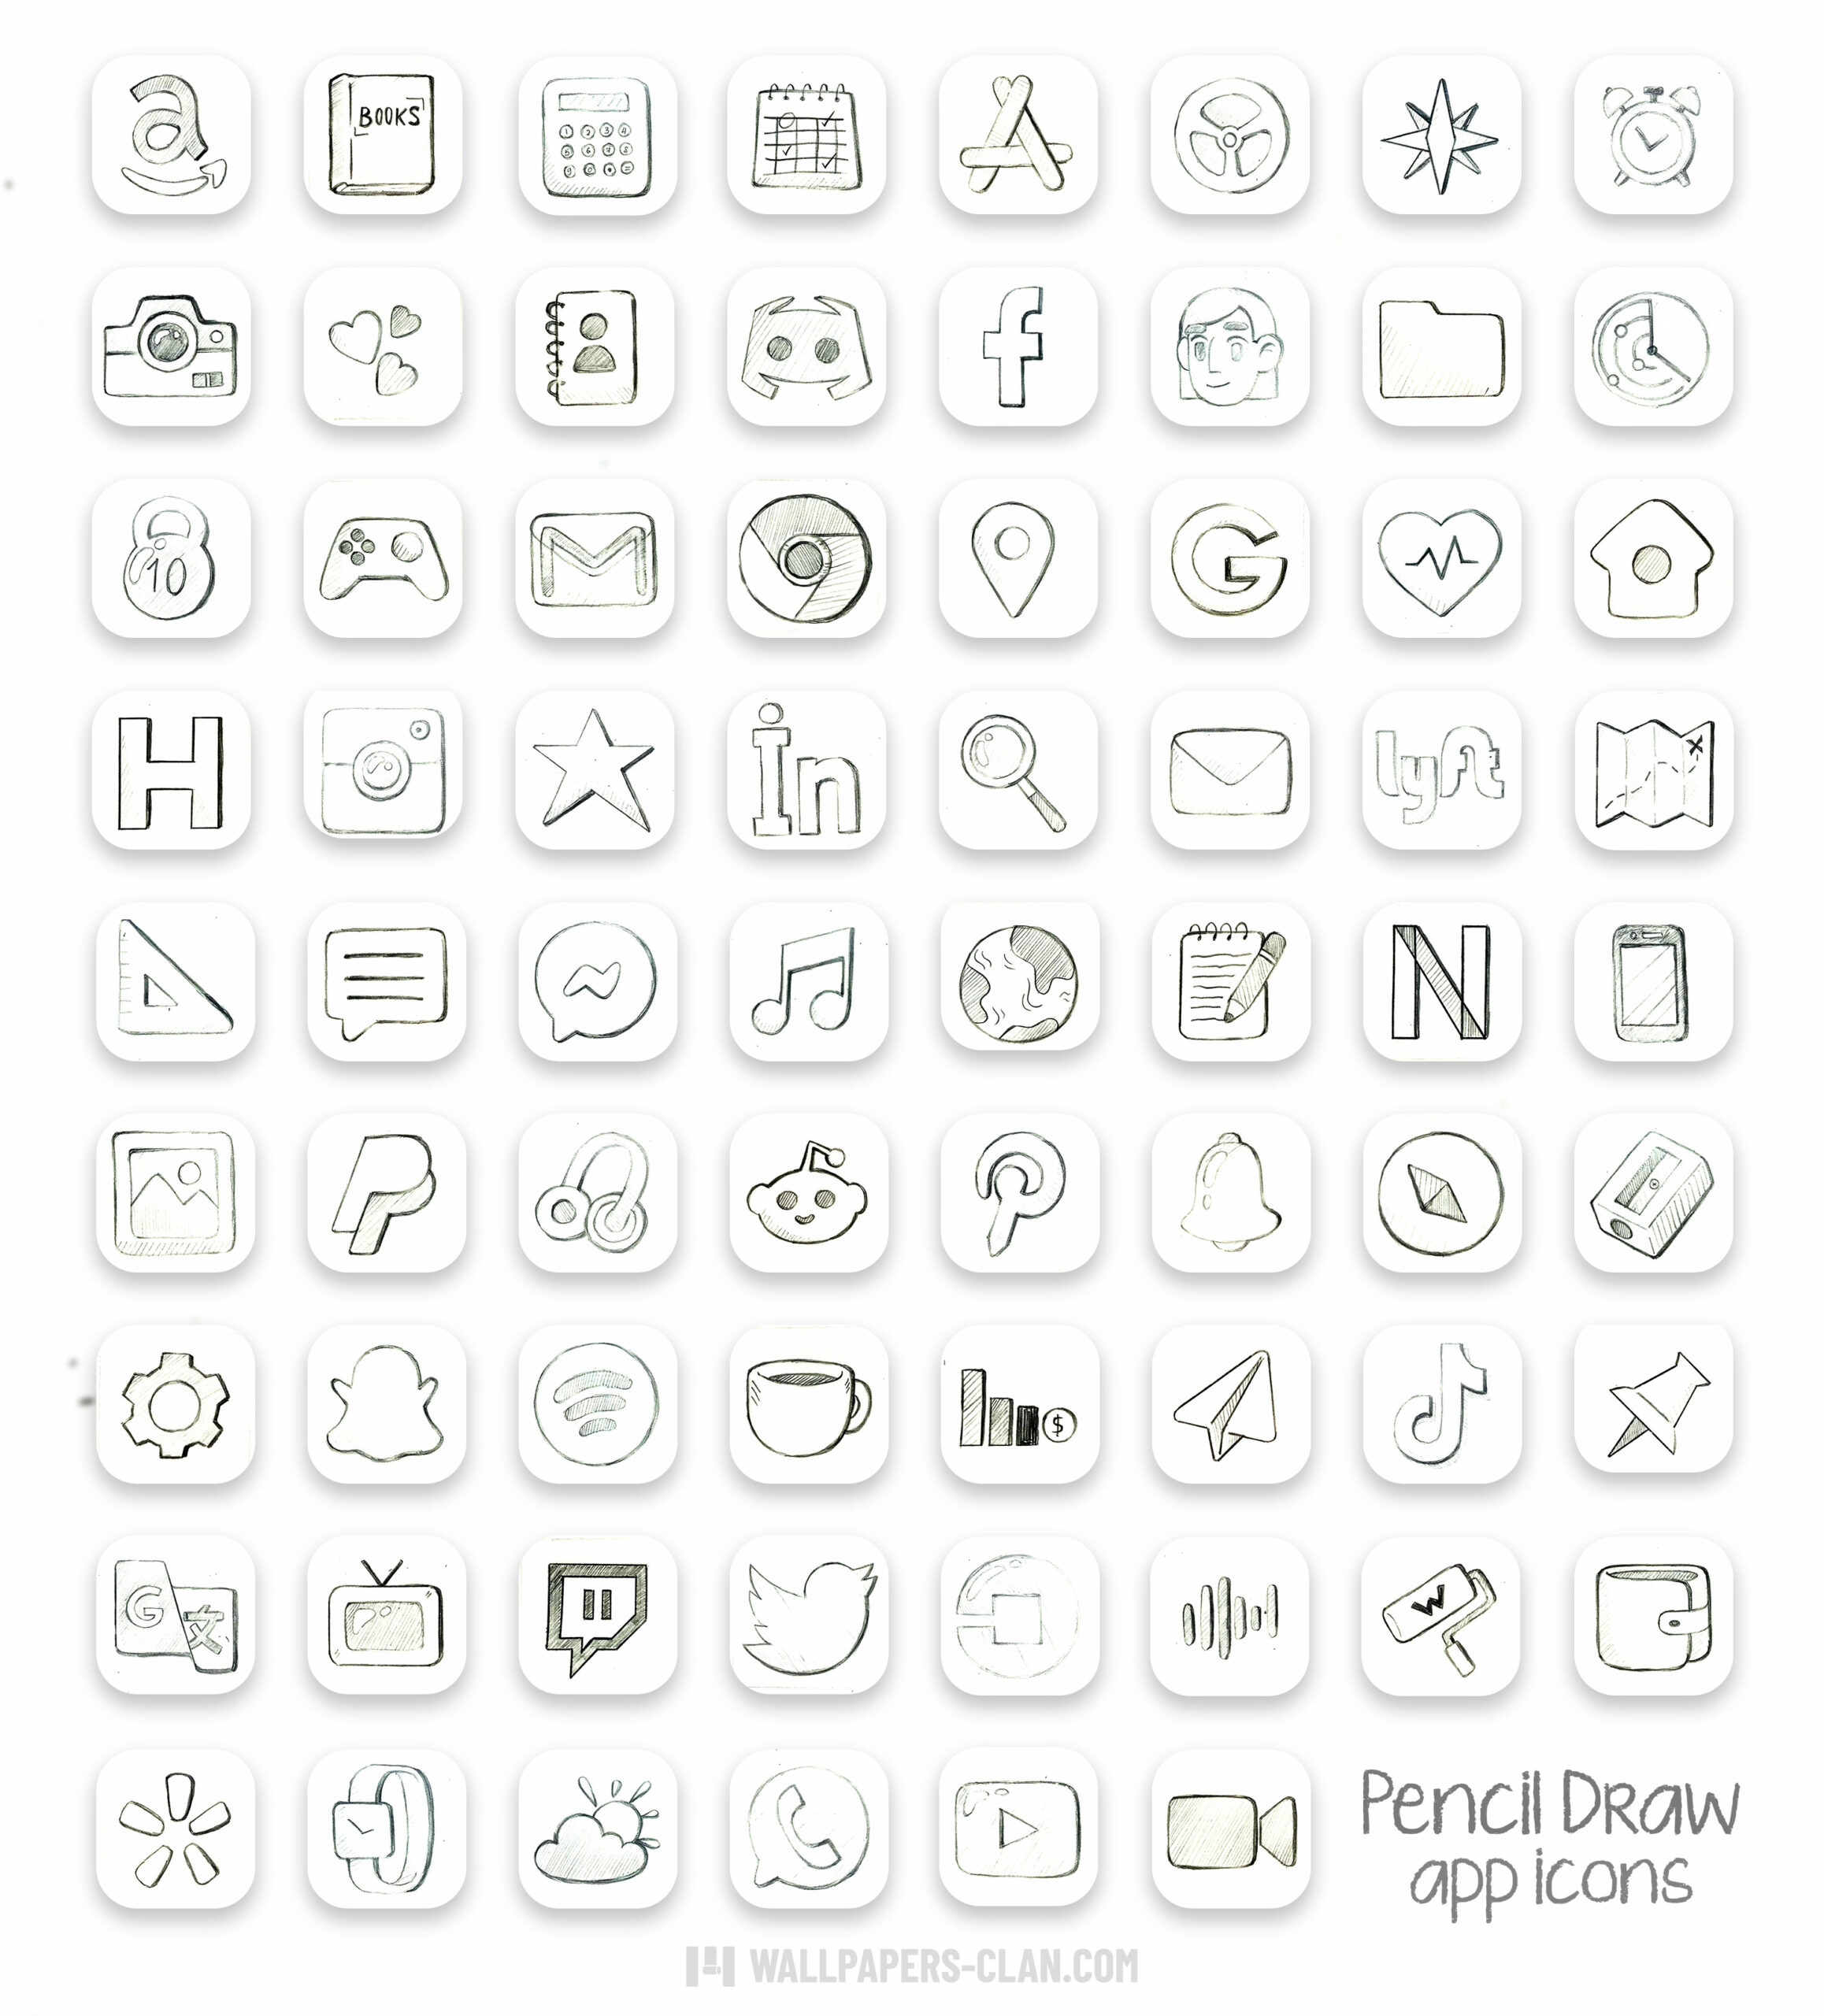 Pencil Draw App Icons iOS & Android Aesthetic App Icons for iP